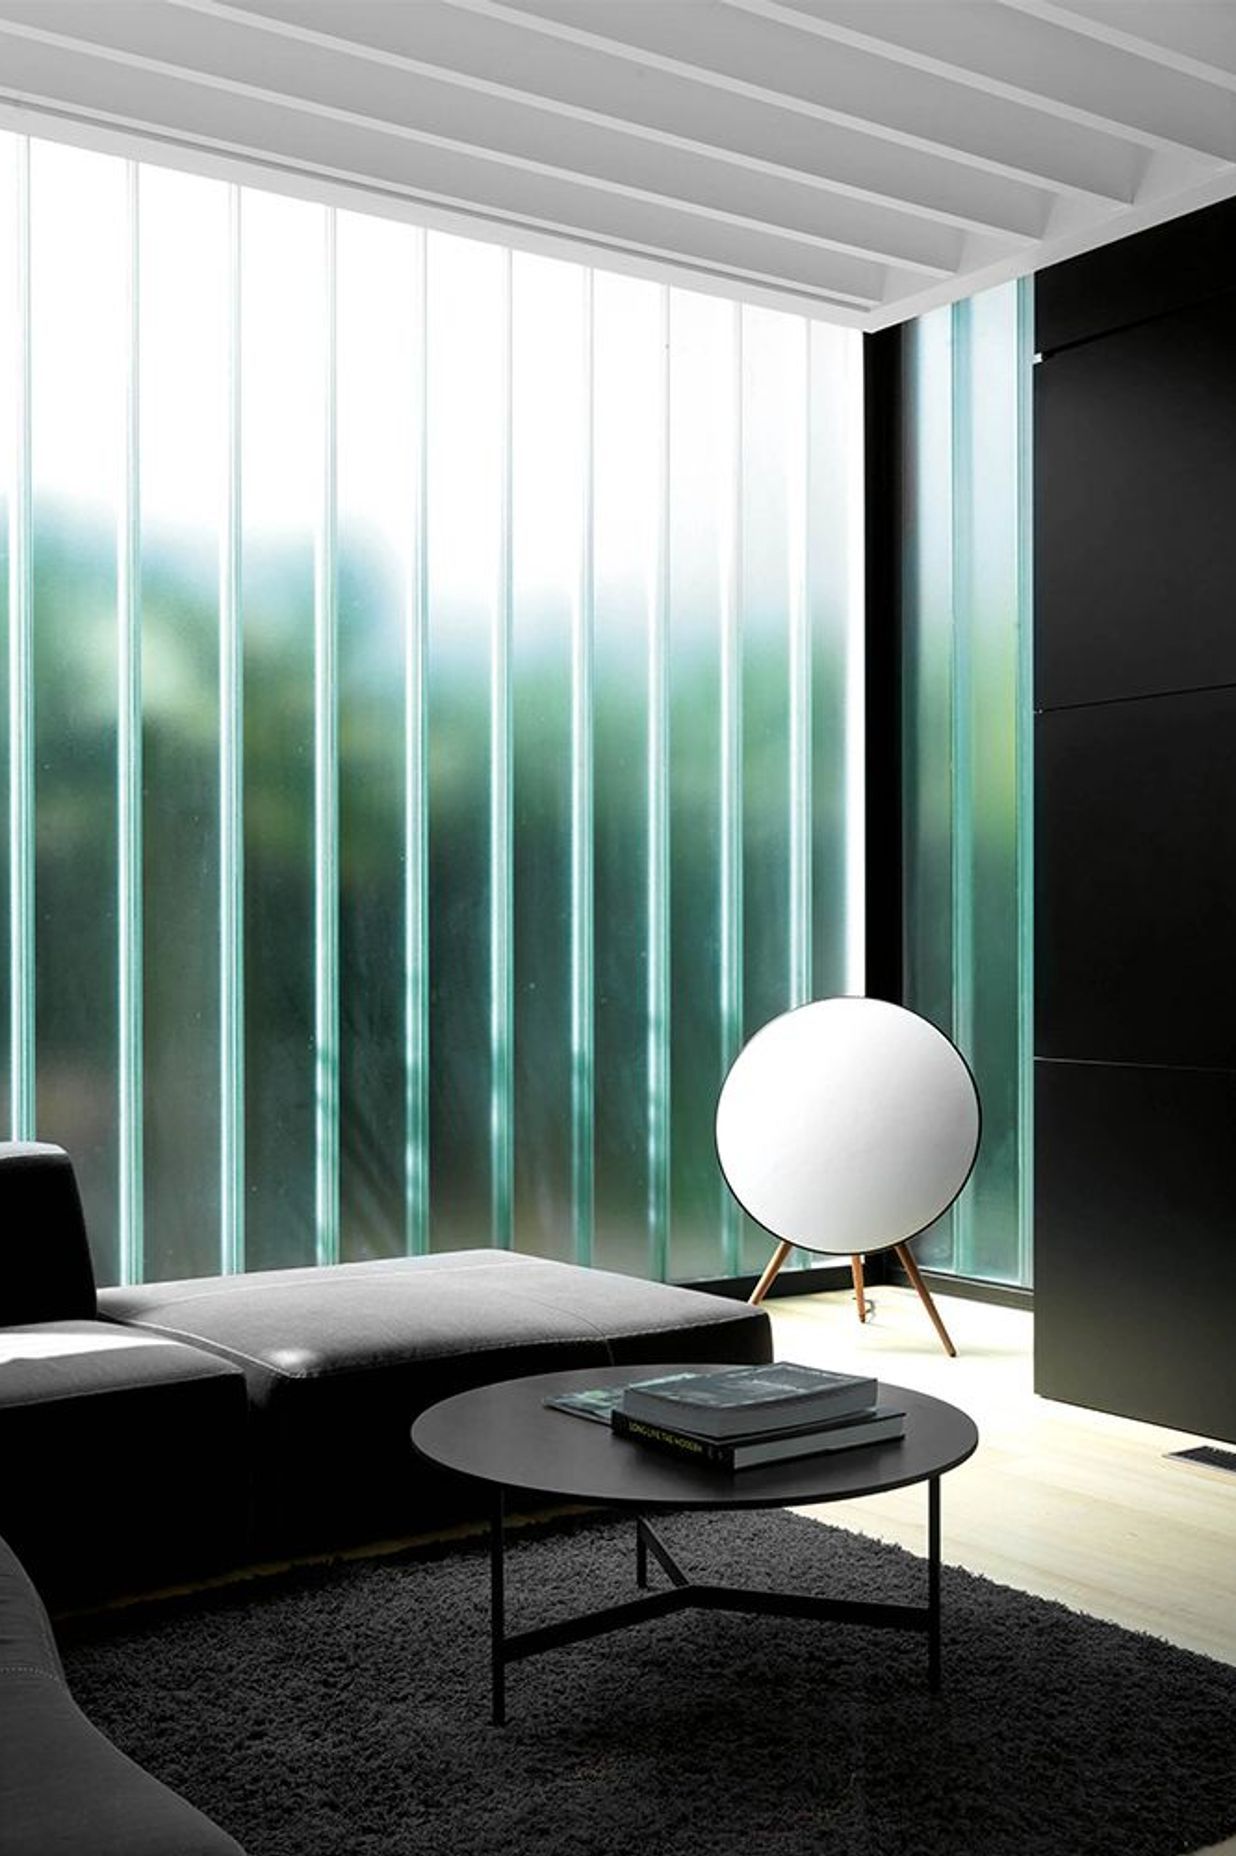 The glass wall admits soft light while providing privacy from neighbours.